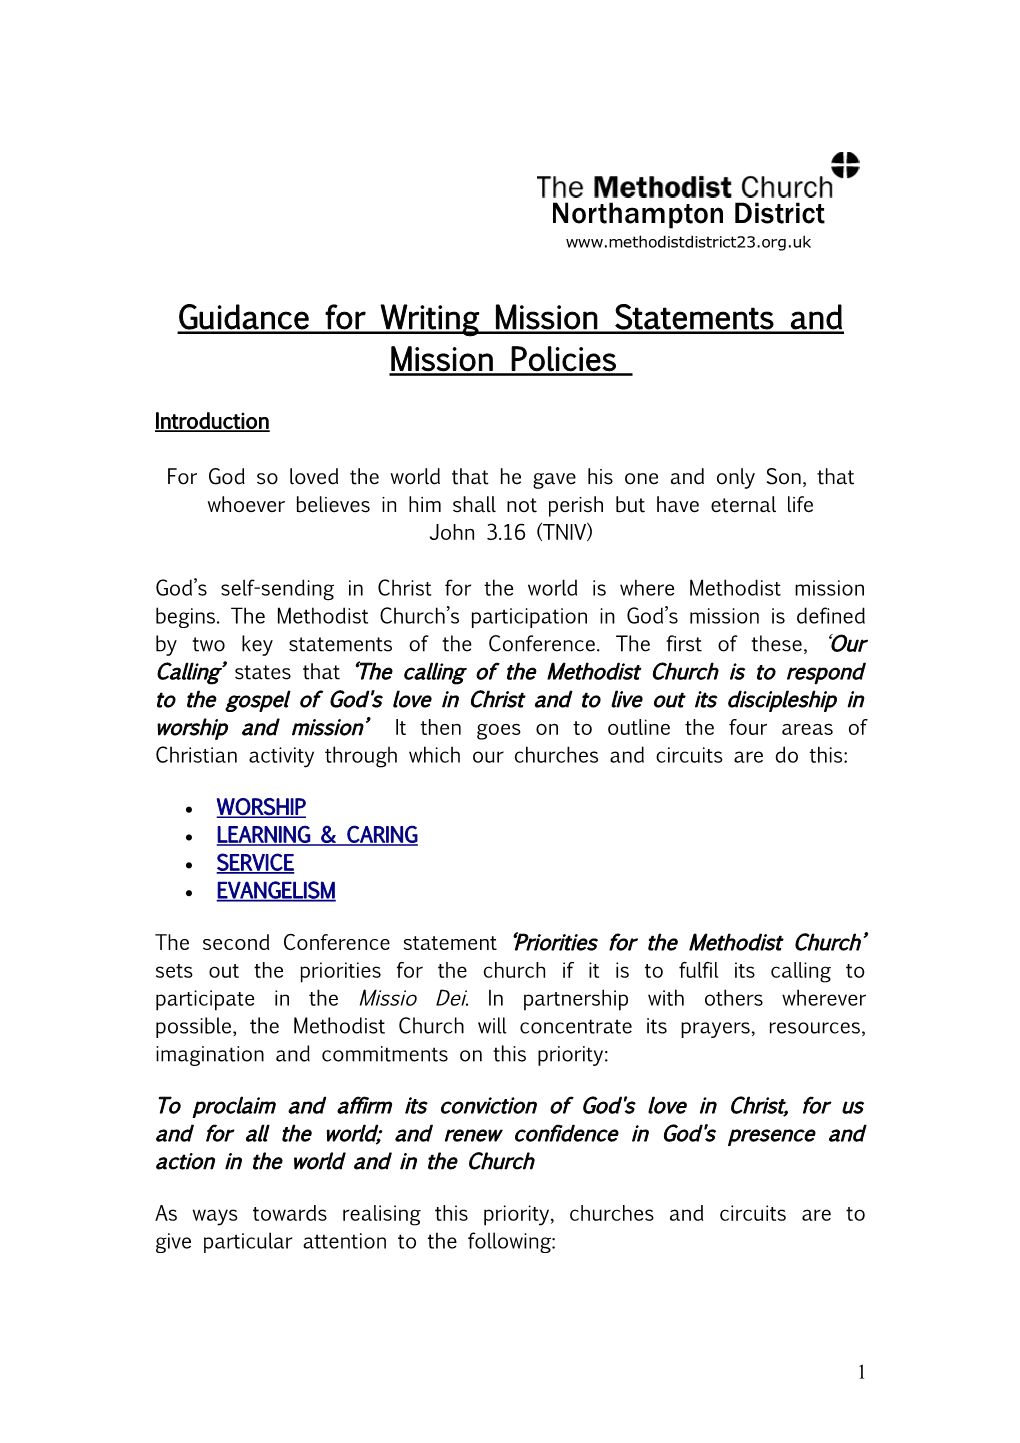 Guidance for Writing Mission Statements and Mission Policies